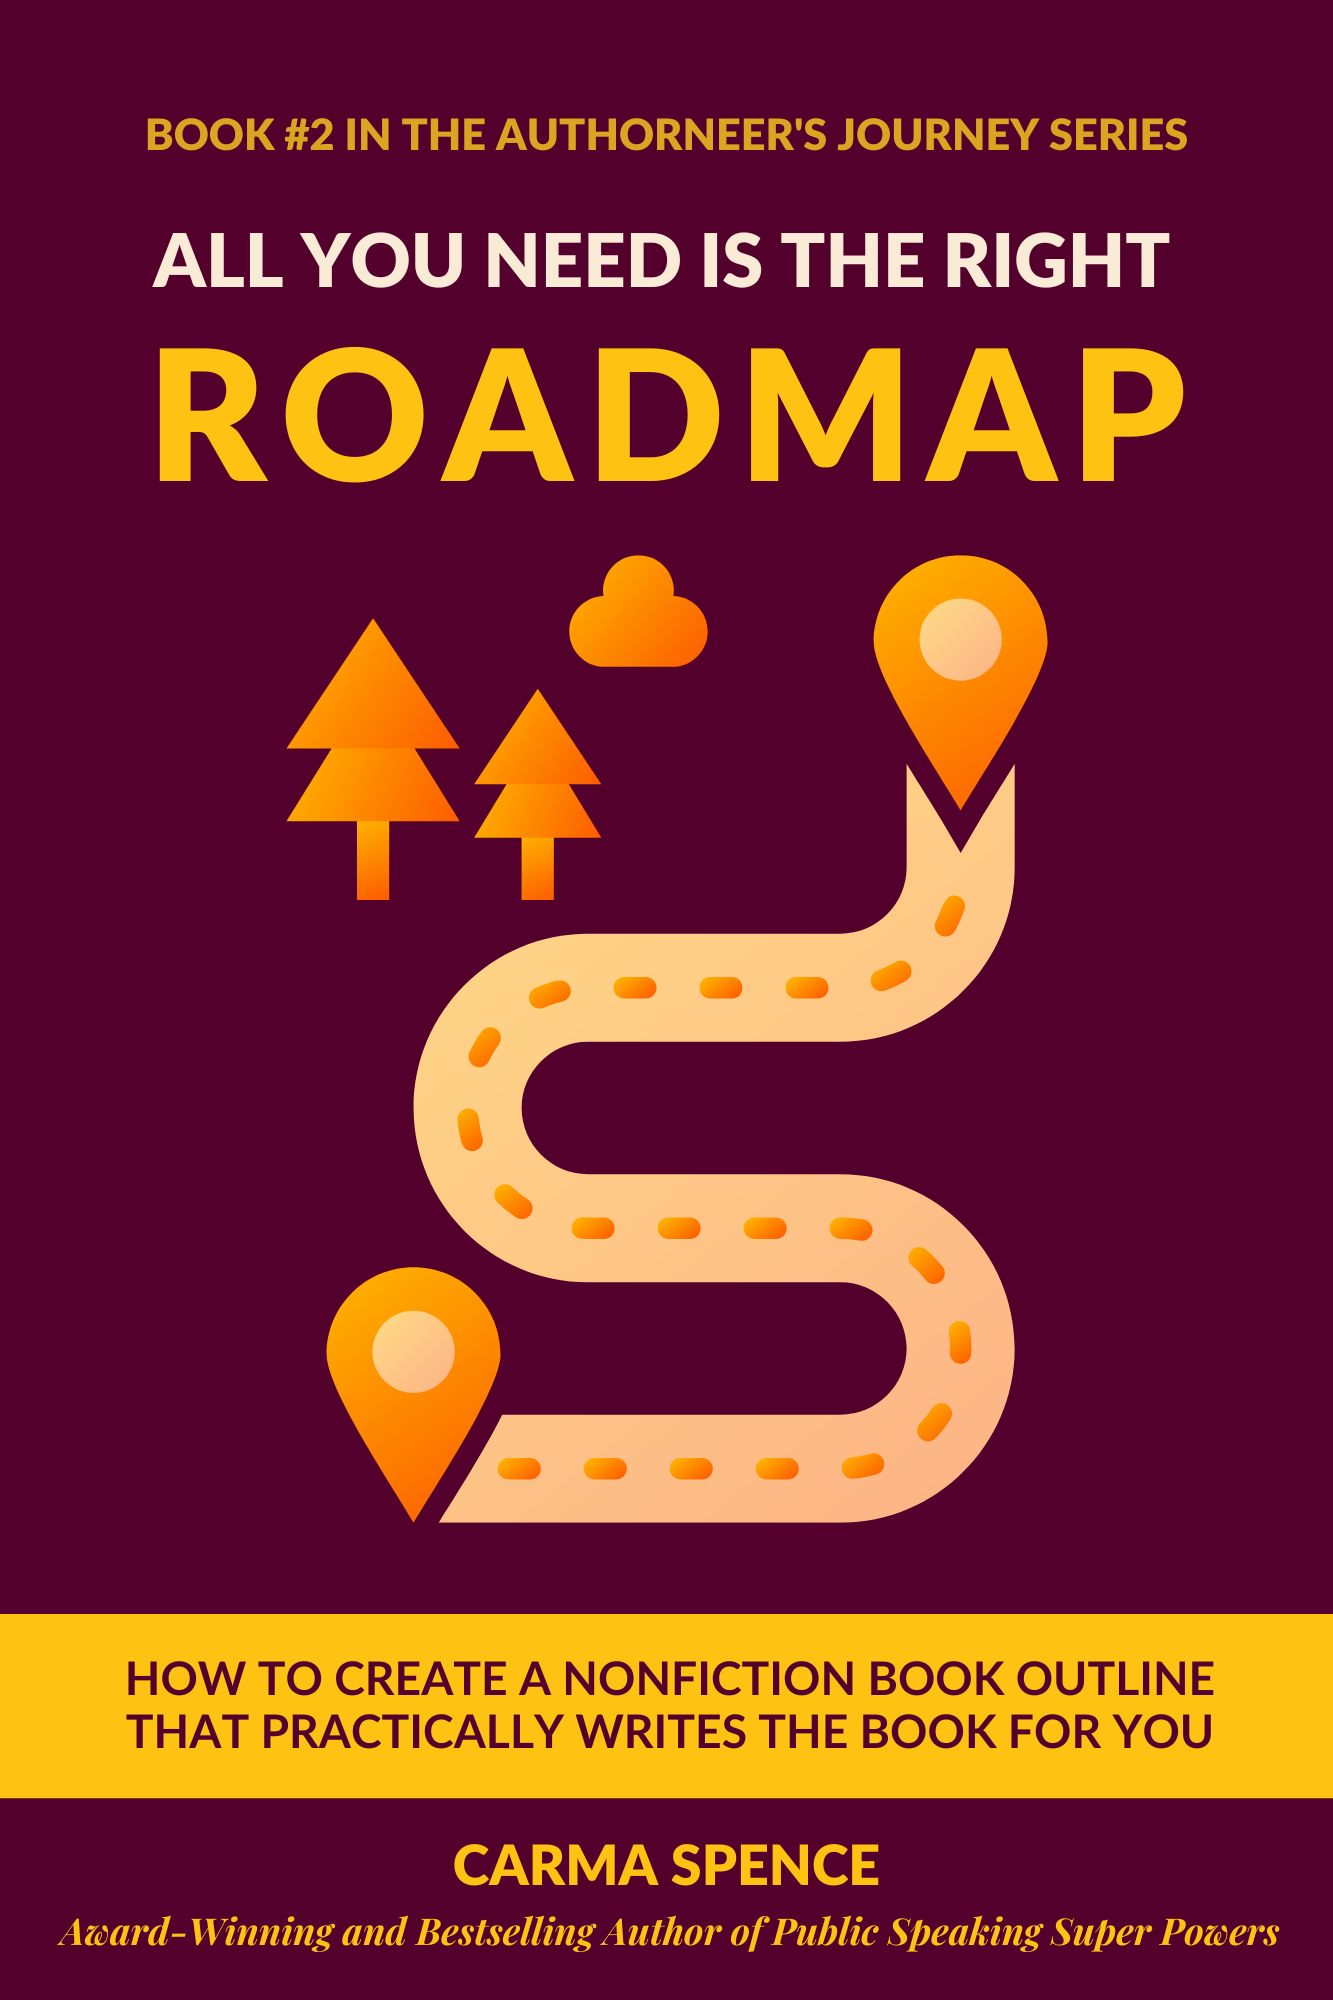 All You Need Is the Right Roadmap